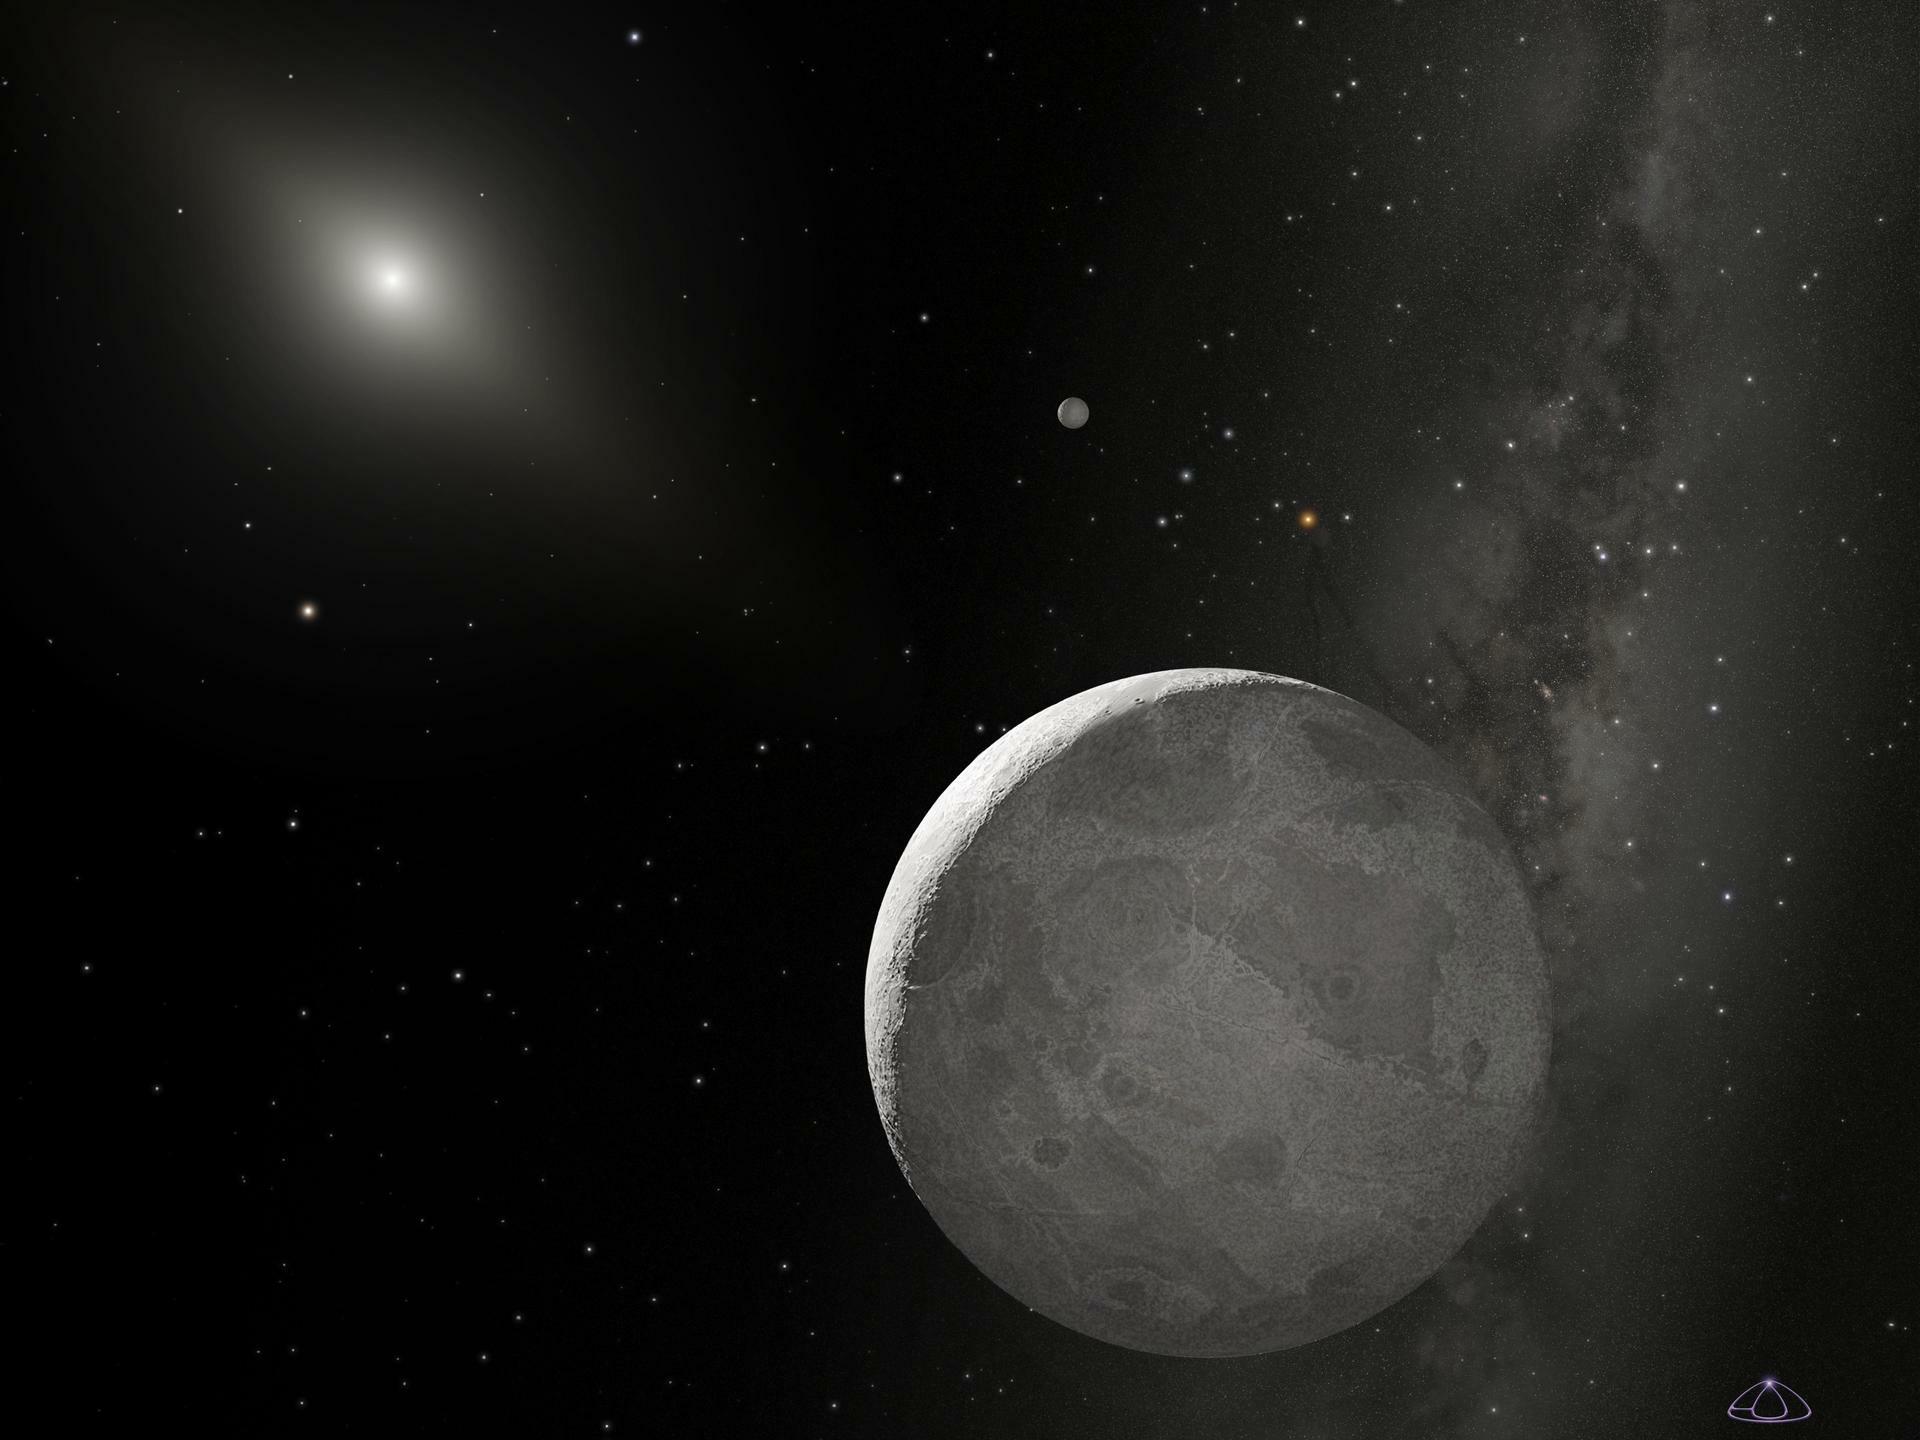 Two Kuiper Belt objects in the distant solar system (illustration)